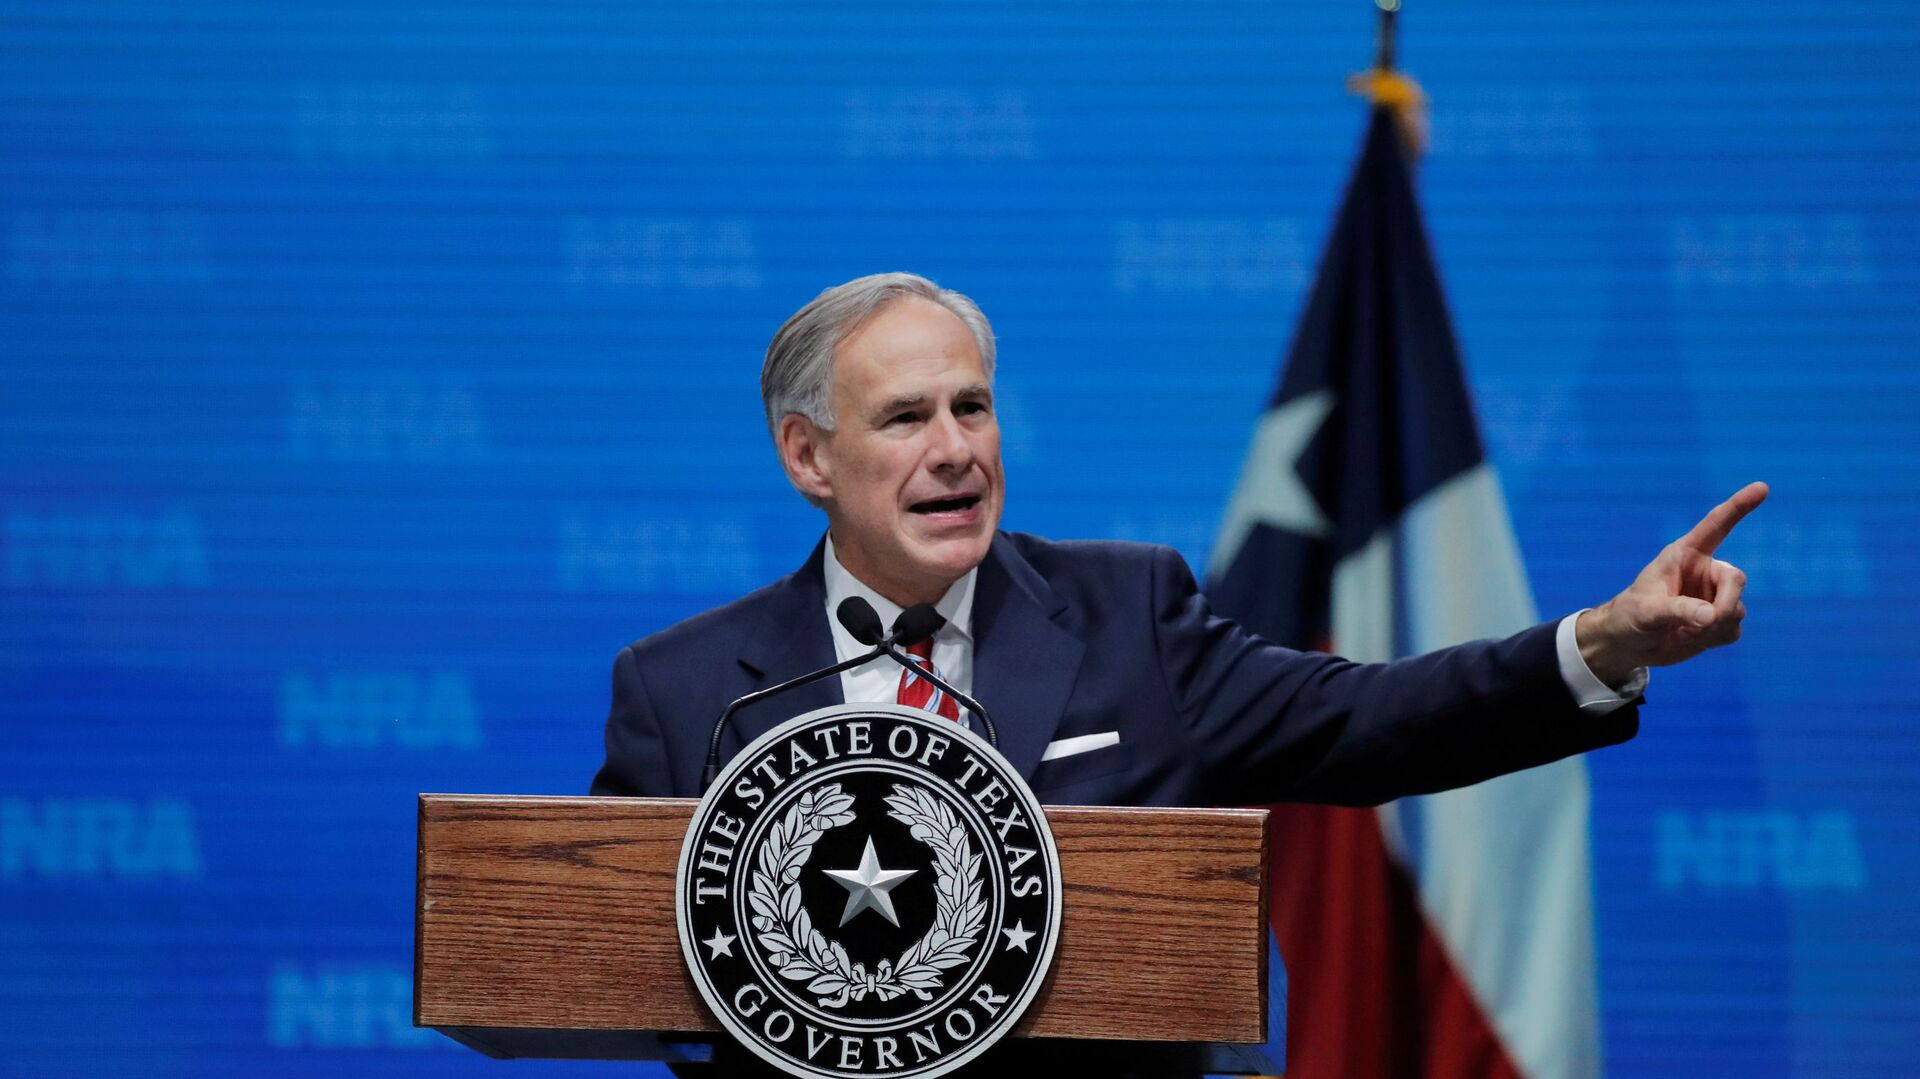 Texas Governor Greg Abbott speaks at the annual National Rifle Association (NRA) convention in Dallas, Texas, U.S., May 4, 2018 - Sputnik International, 1920, 13.07.2021